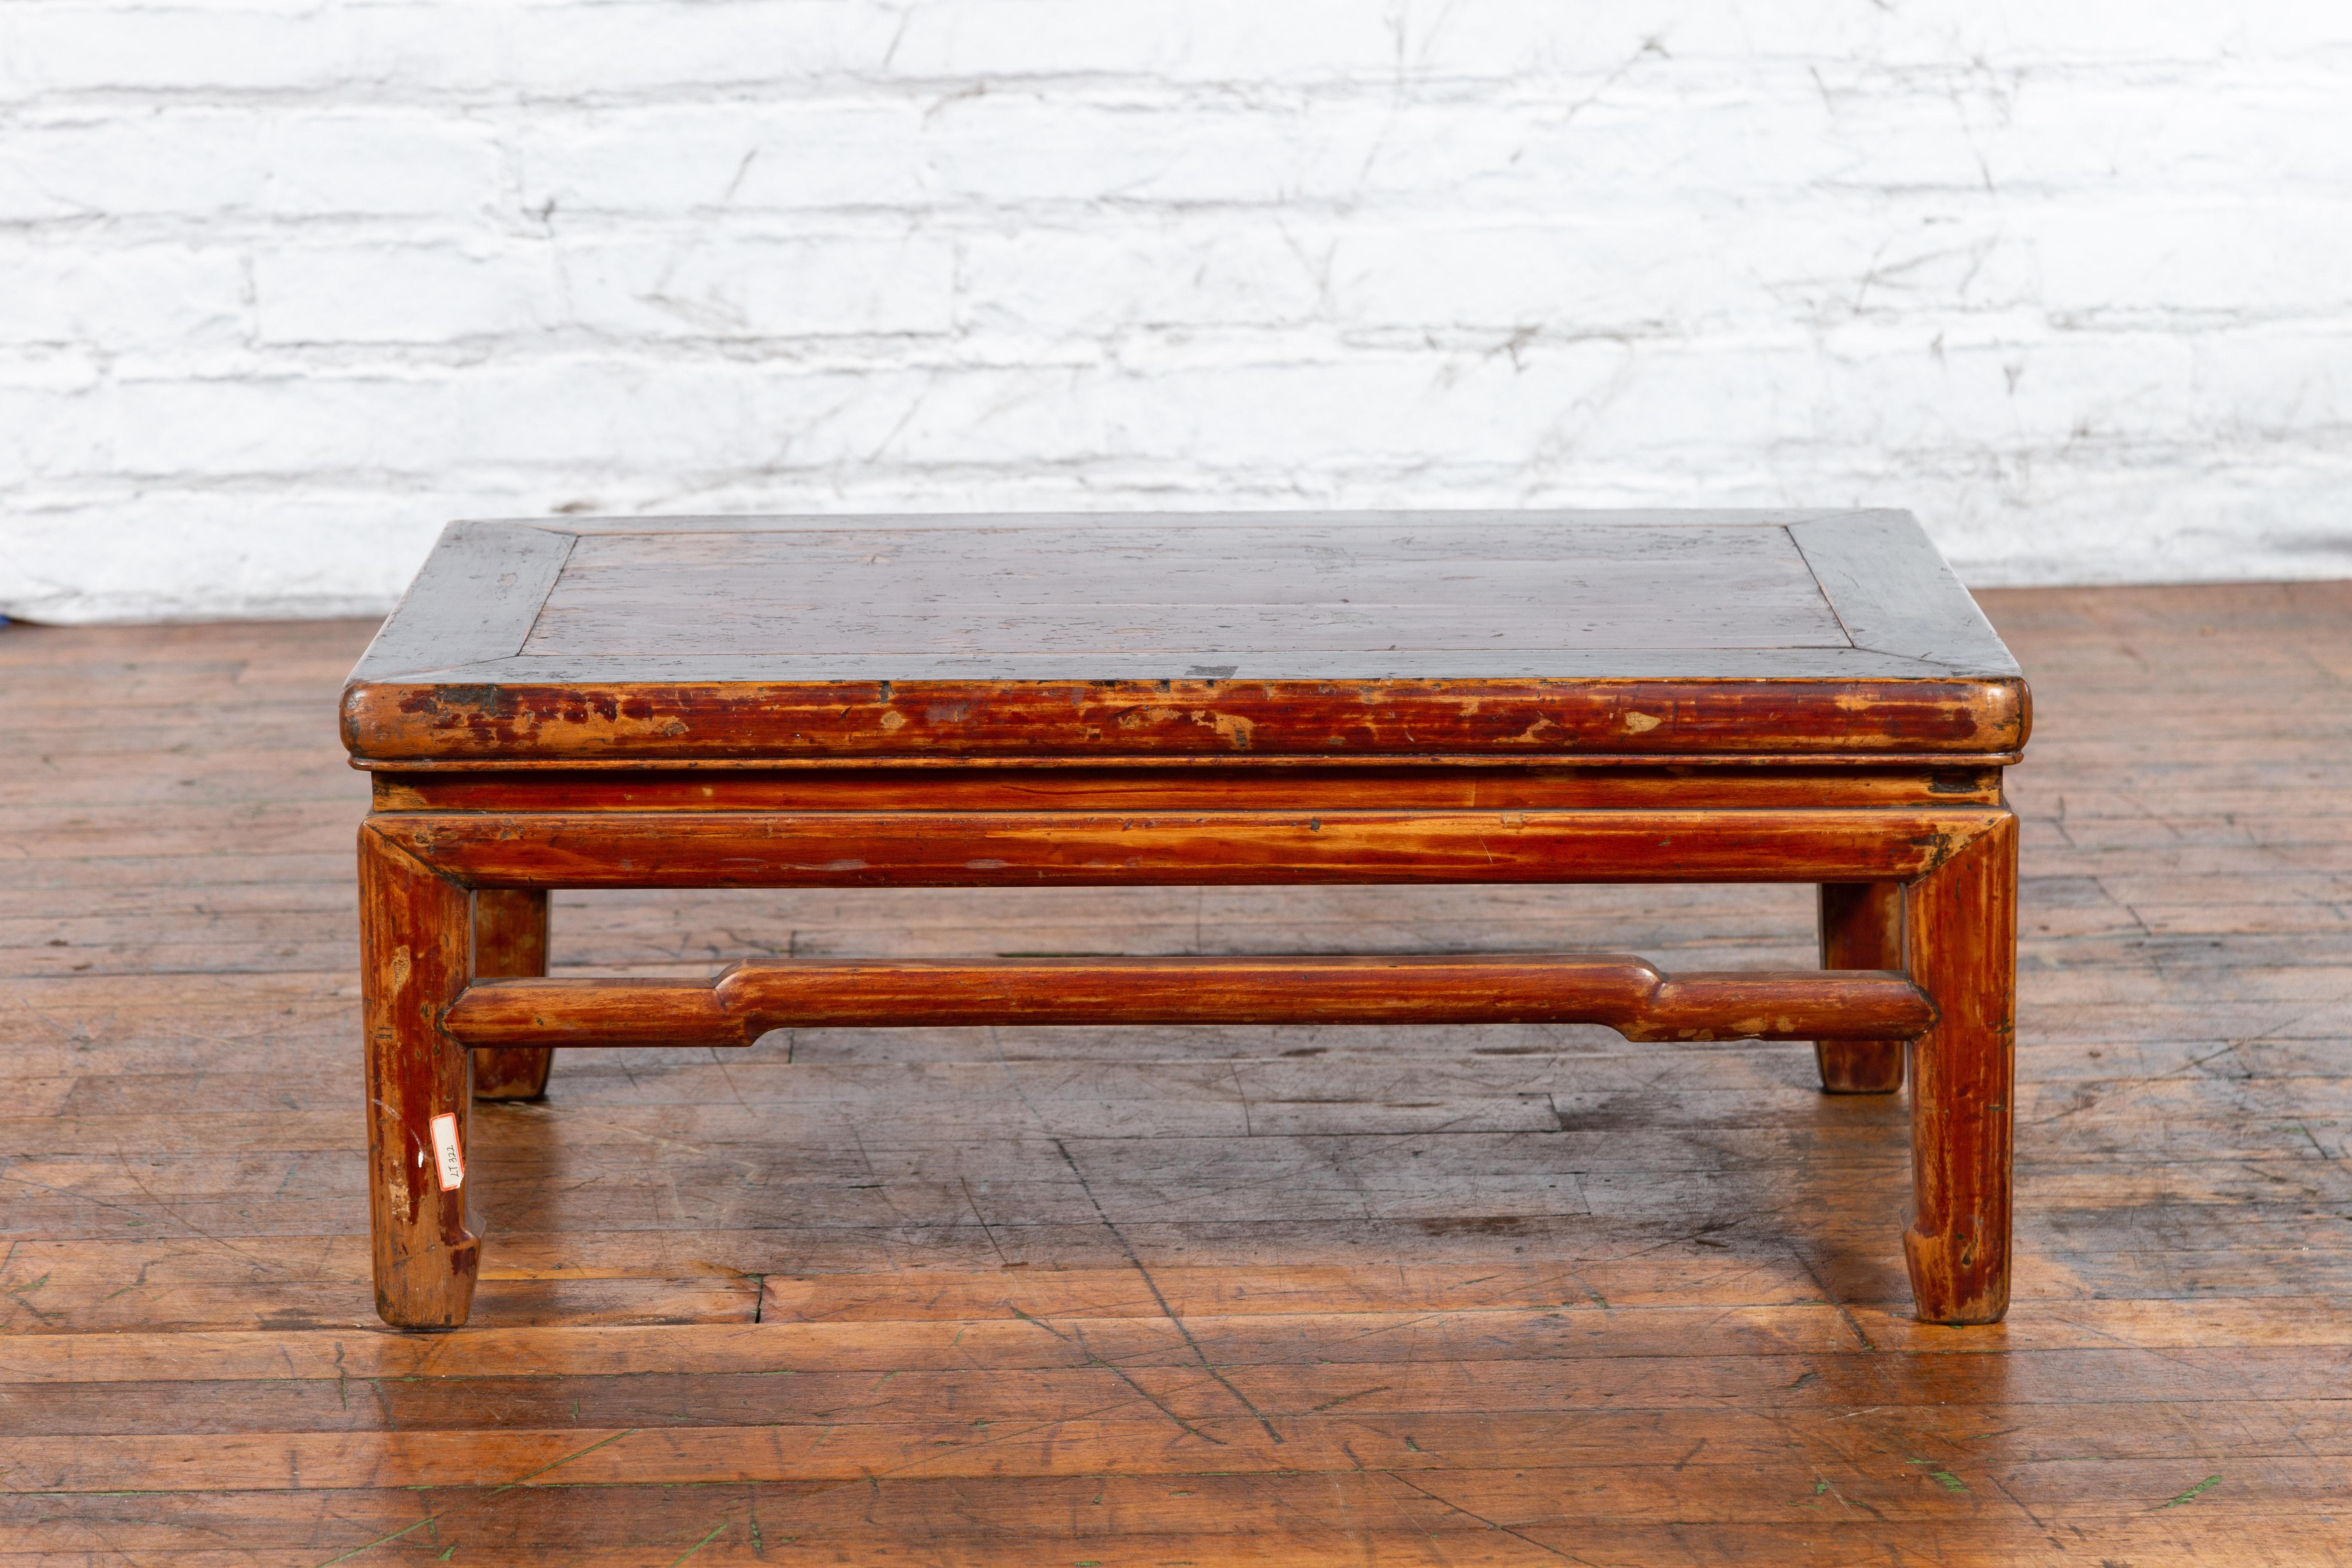 Qing Dynasty 19th Century Low Distressed Side Table with Humpback Stretchers For Sale 6